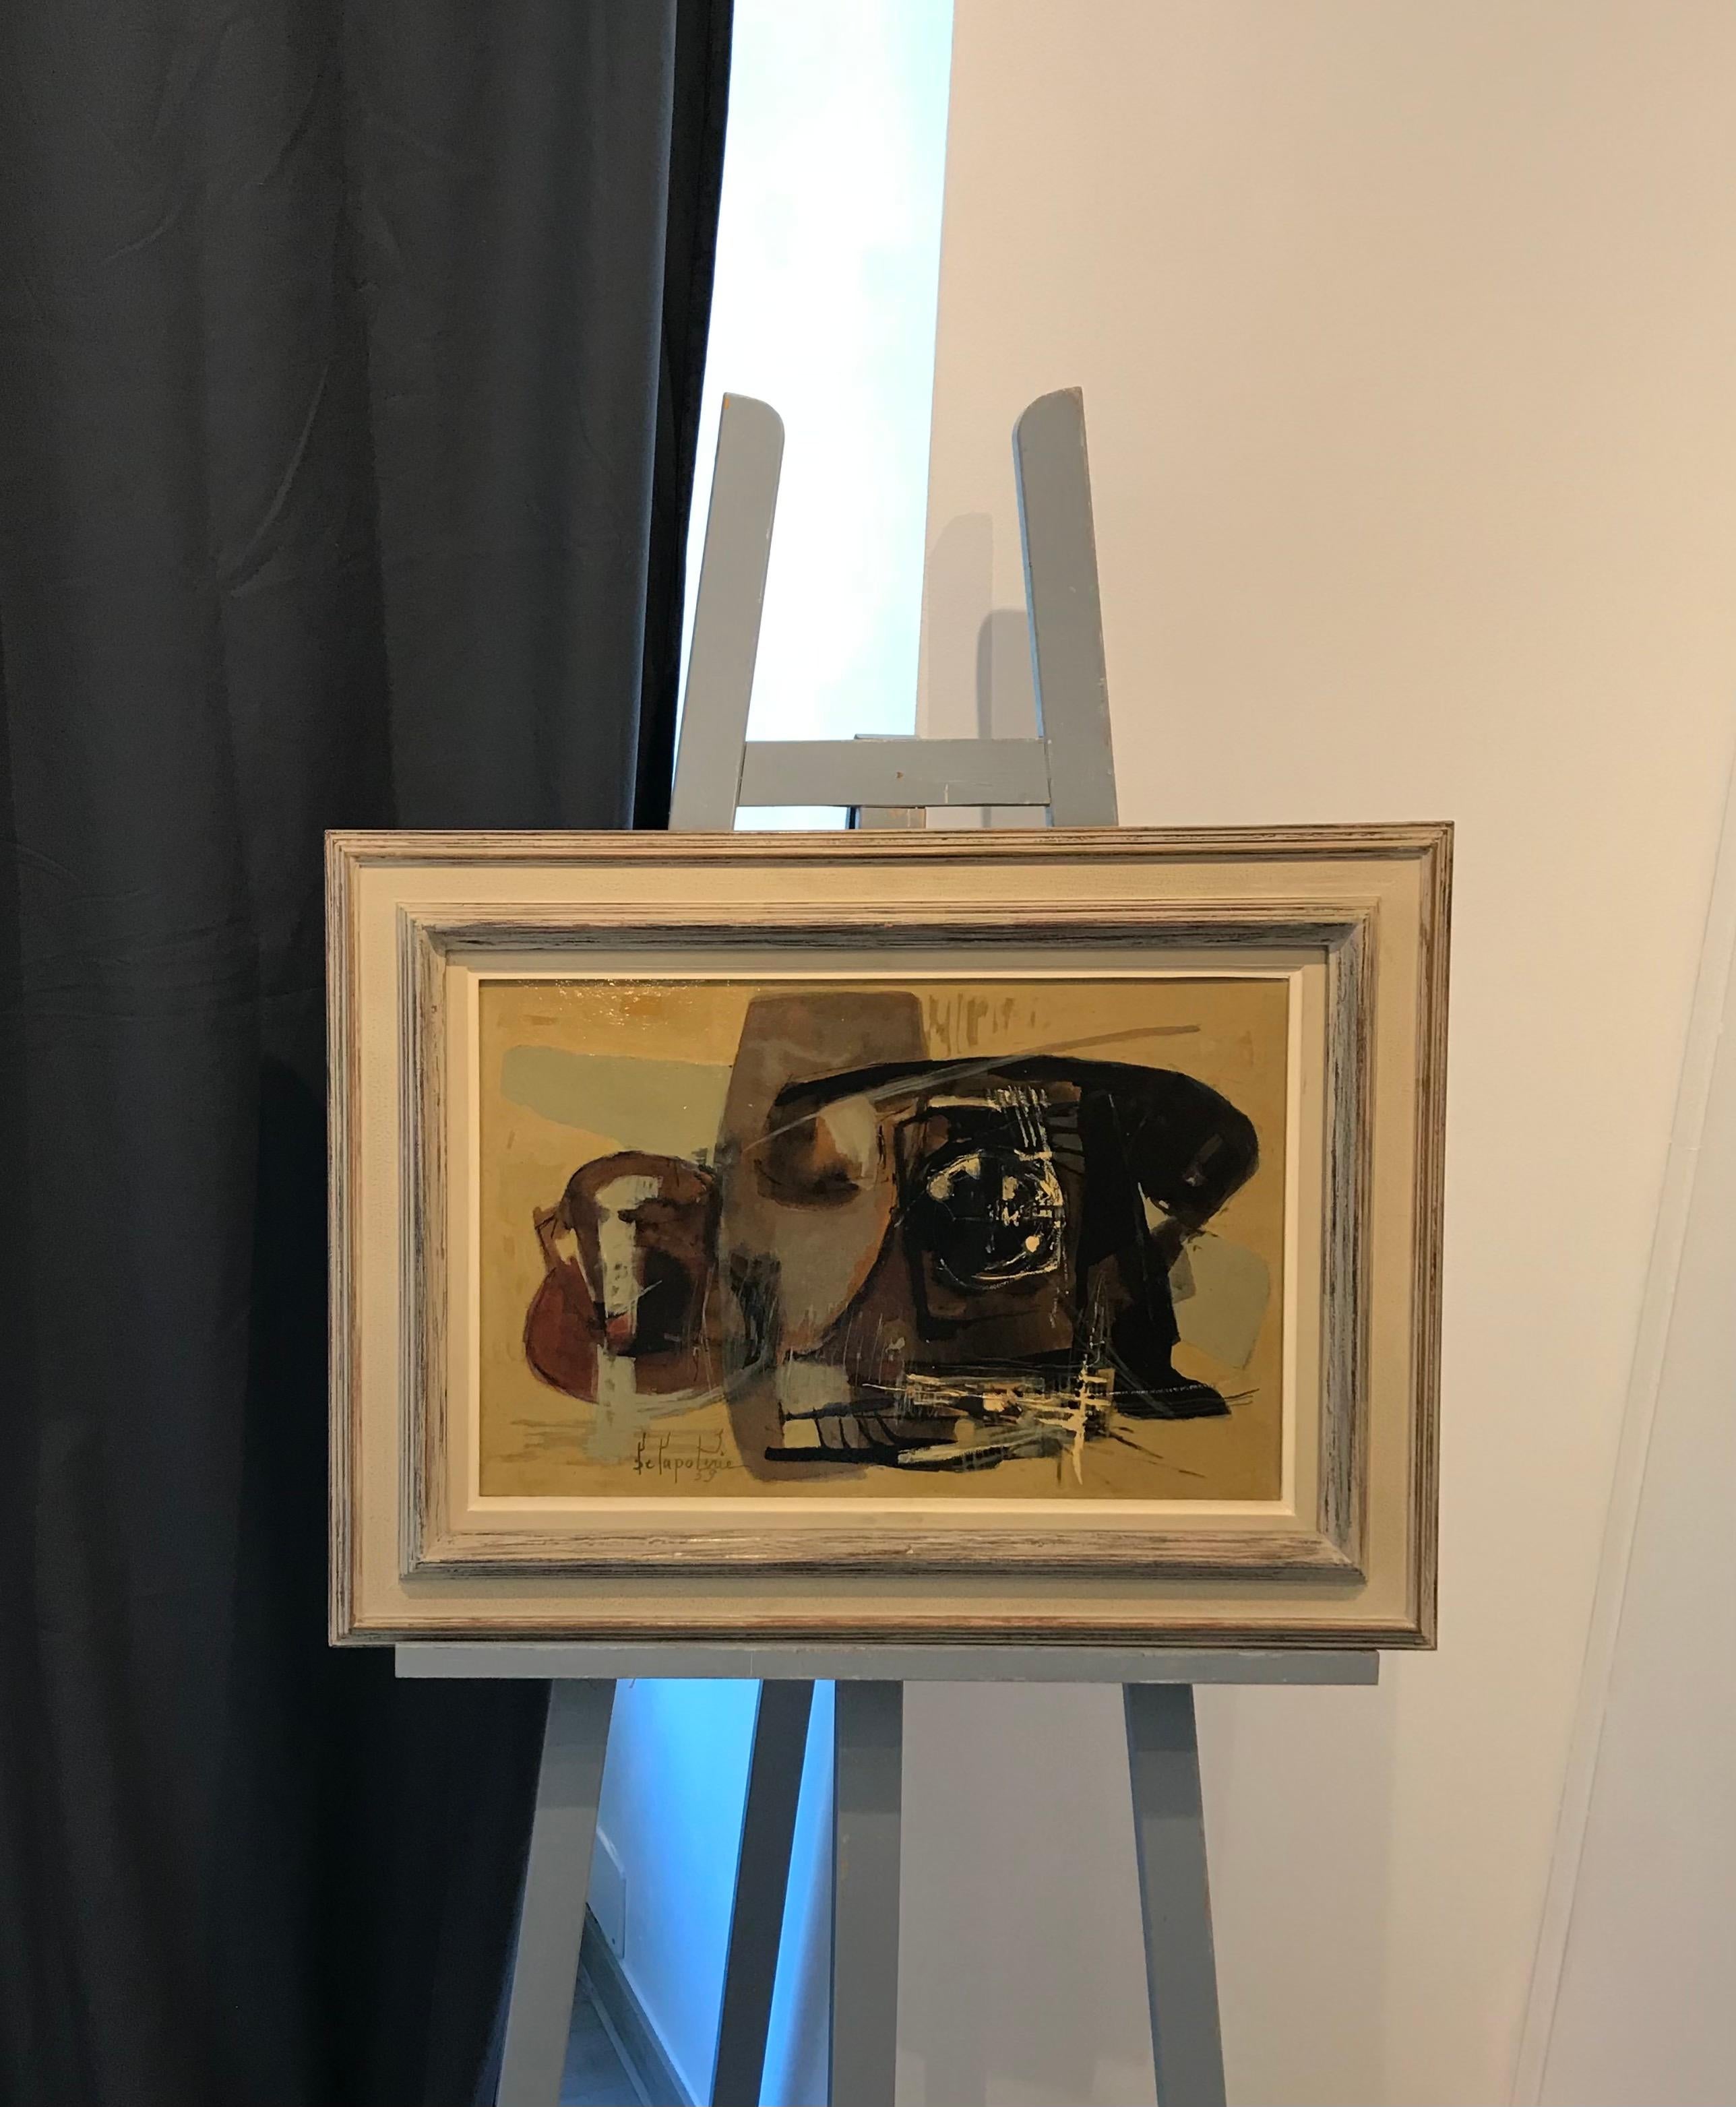 The phone - Painting by Paul Delapoterie